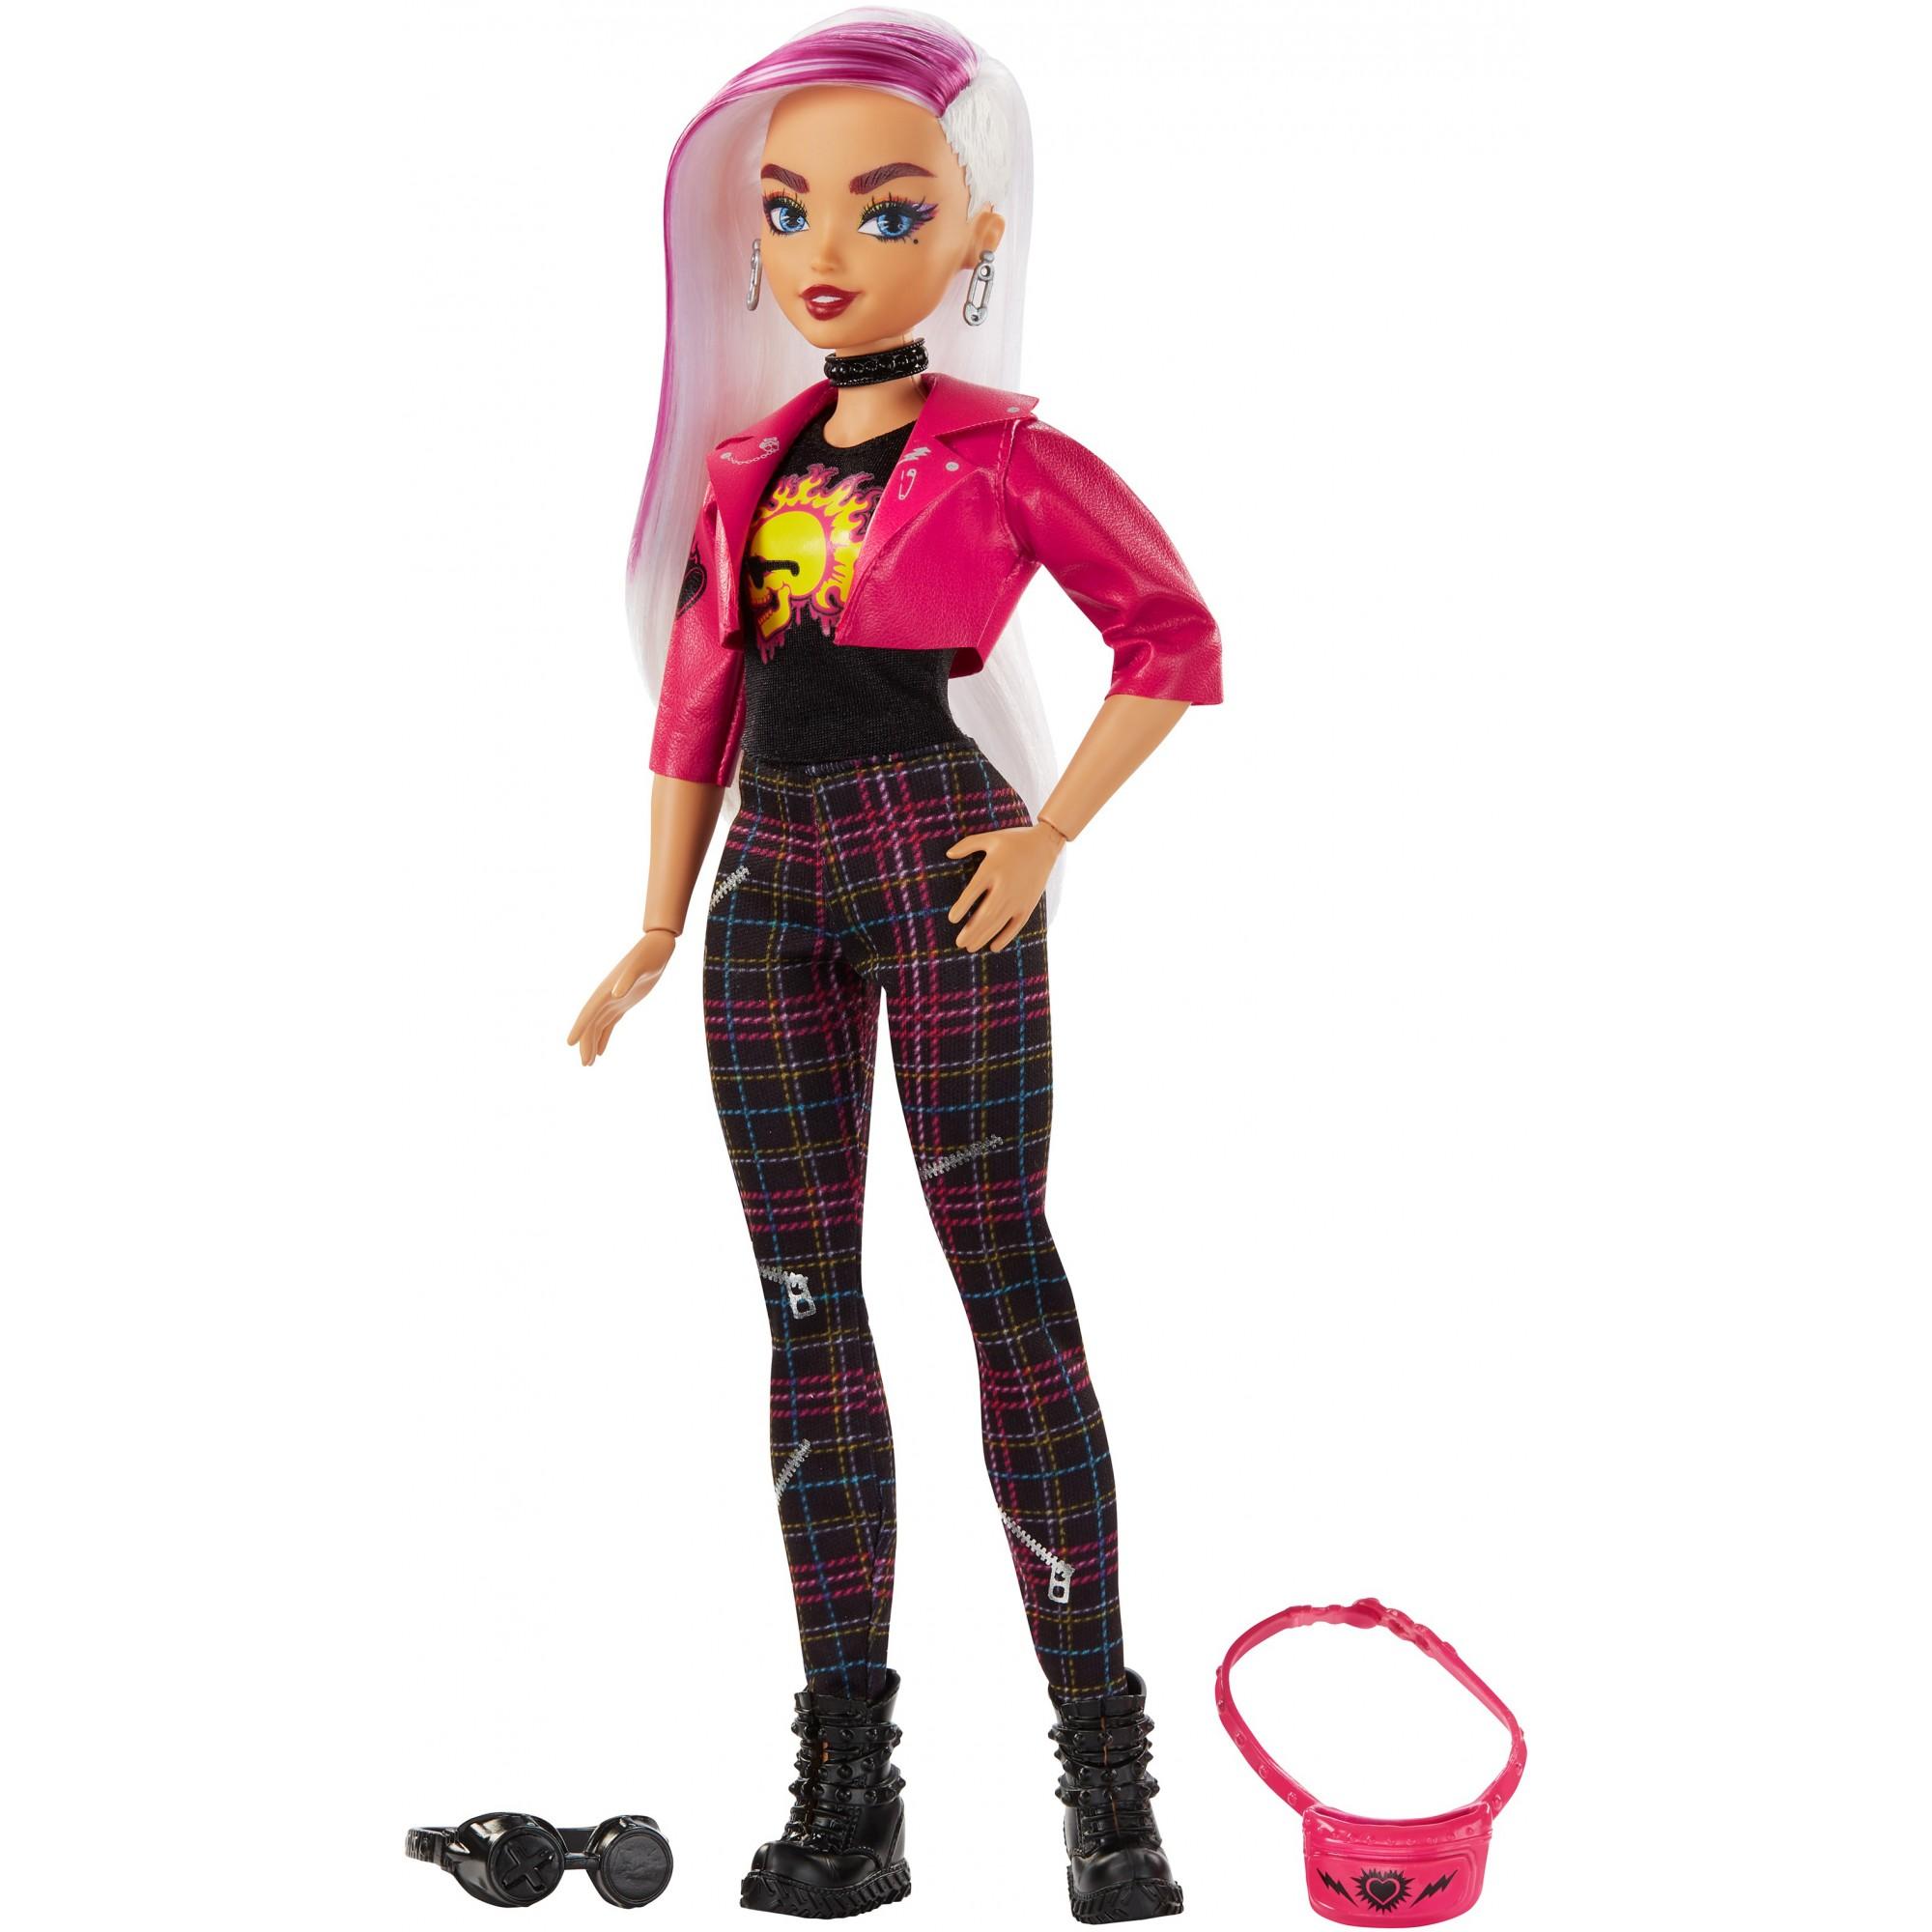 Wild Hearts Crew Rallee Radmore Doll with Style Accessories - image 1 of 10